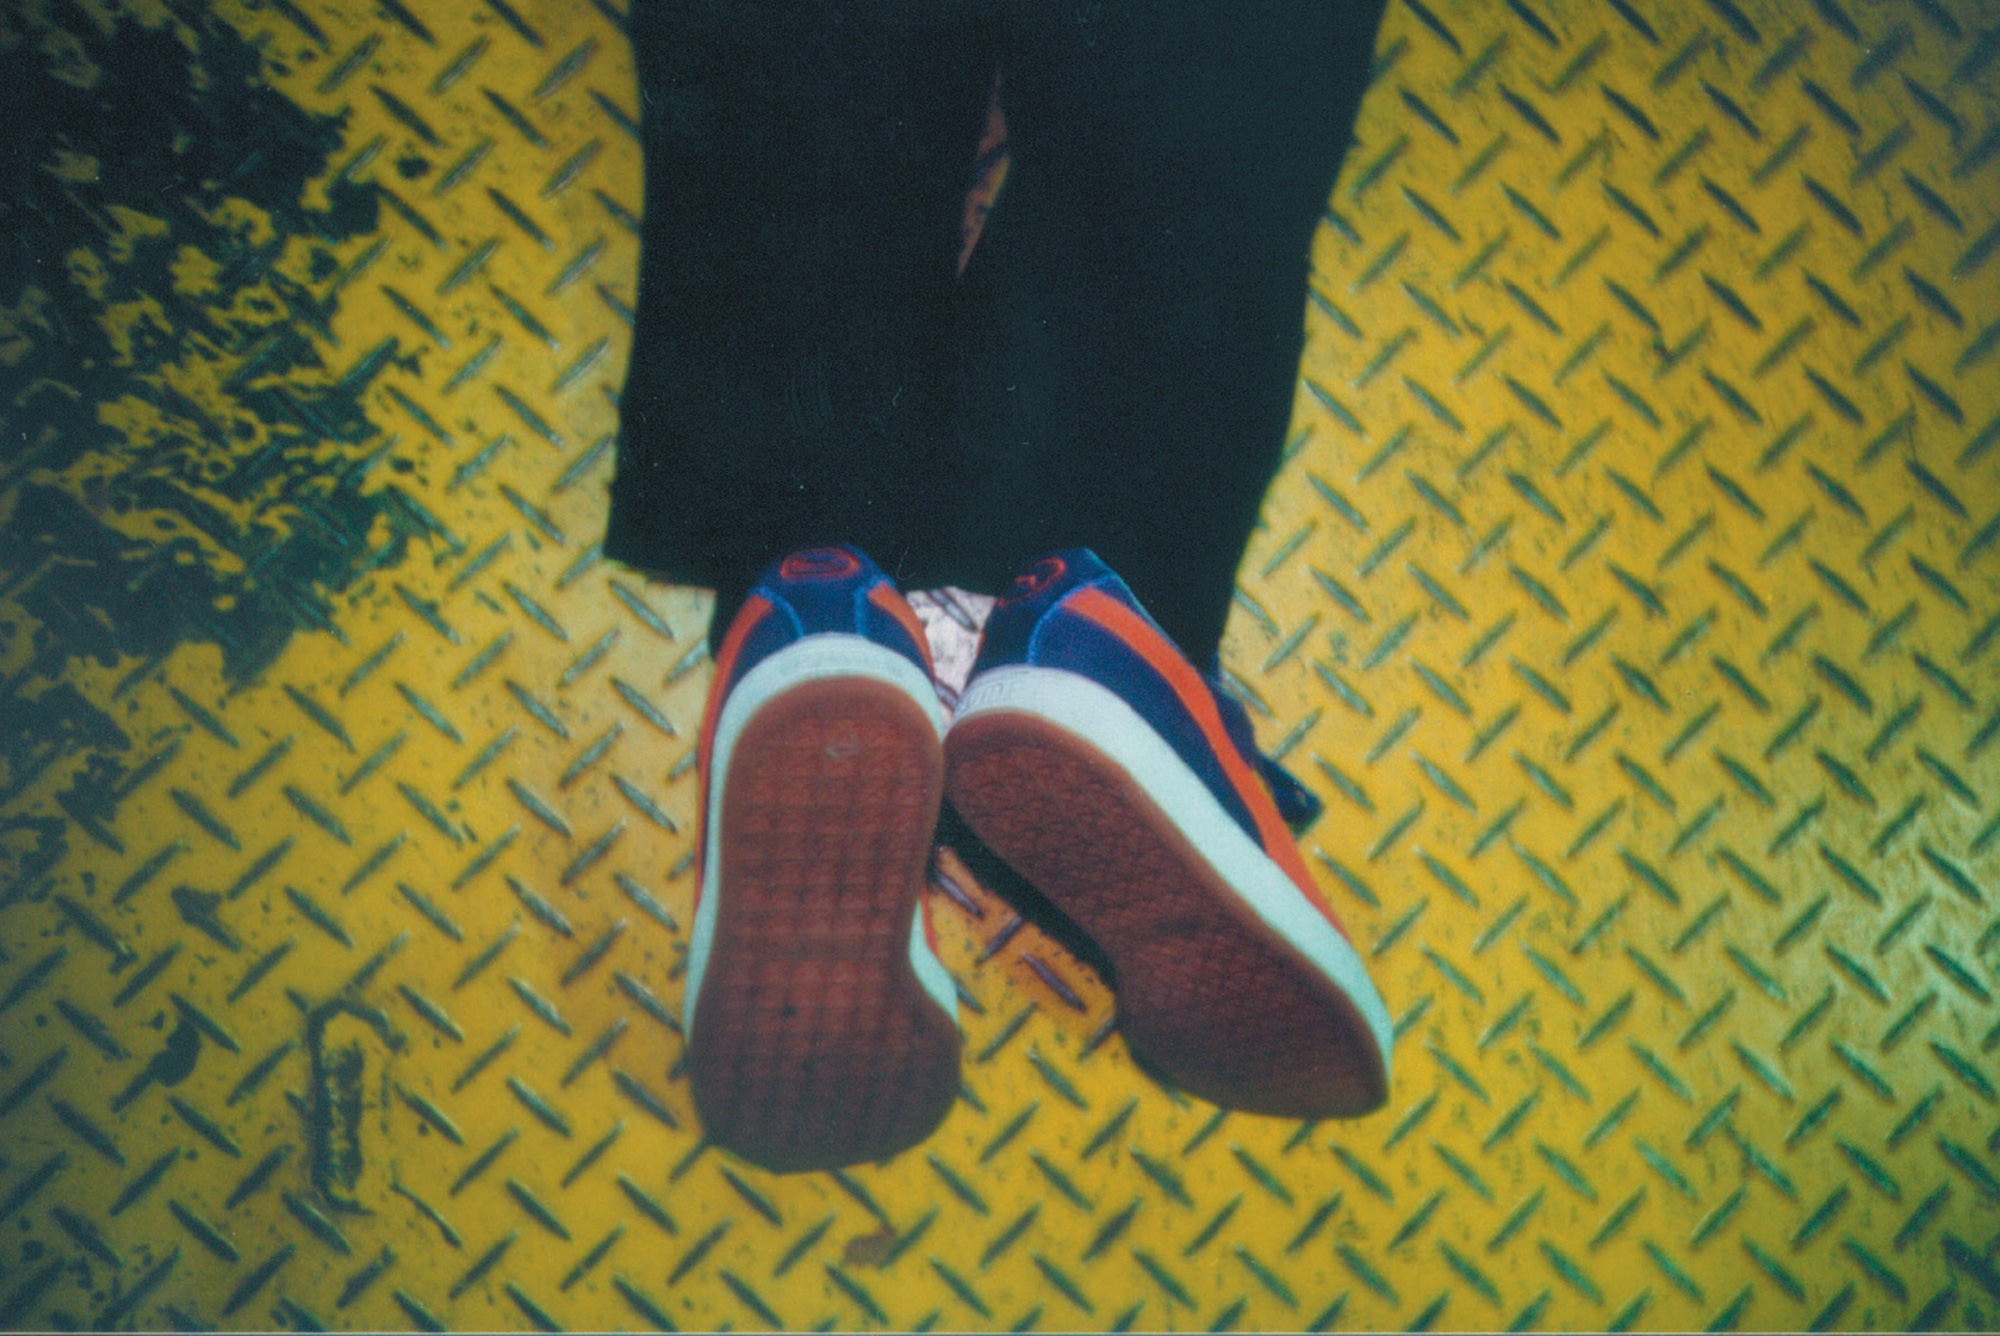 A Lomographic image depicting the feet of a person wearing sneakers.